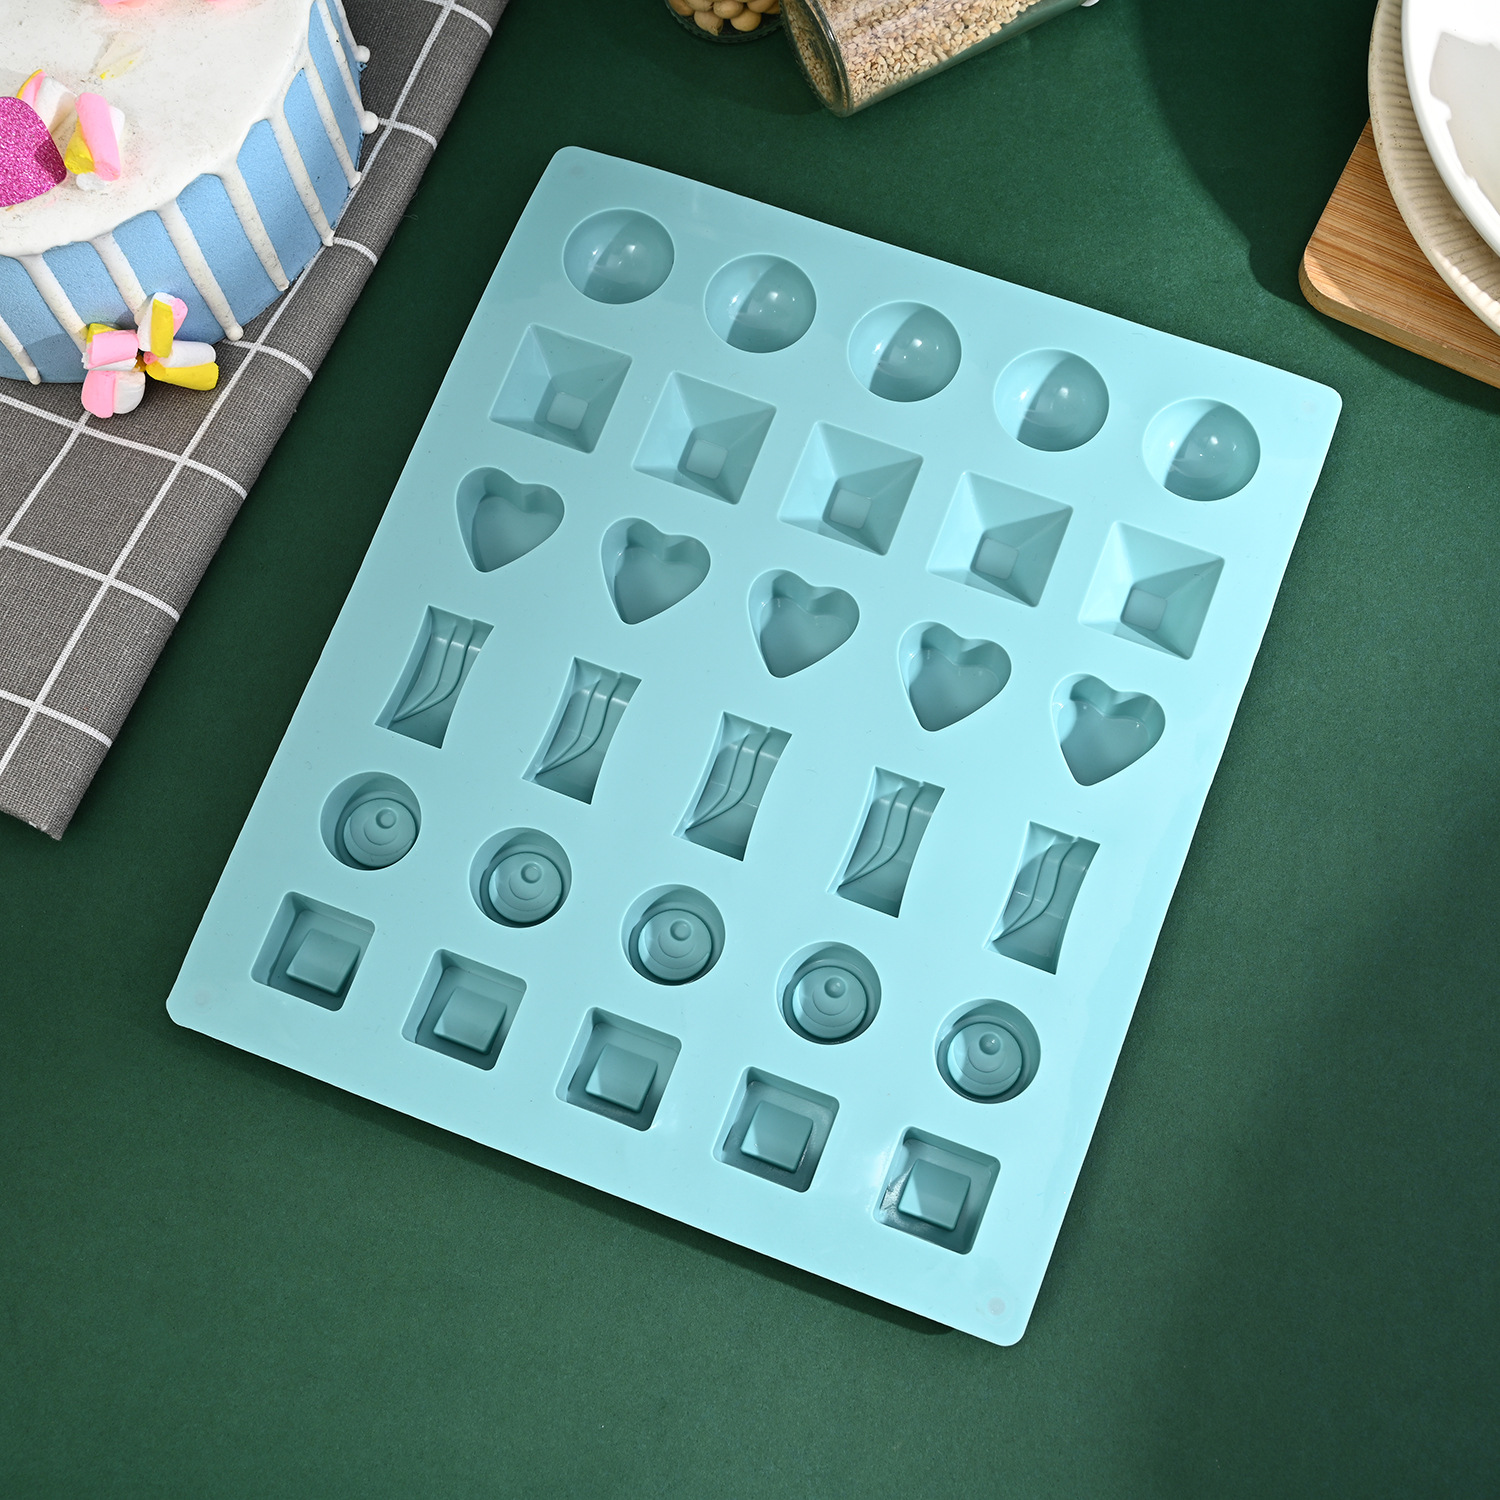 Diy Edible Silicon Chocolate Silicone Mold 30 Grid Square Love Household Handmade Cake Mold Ice Tray